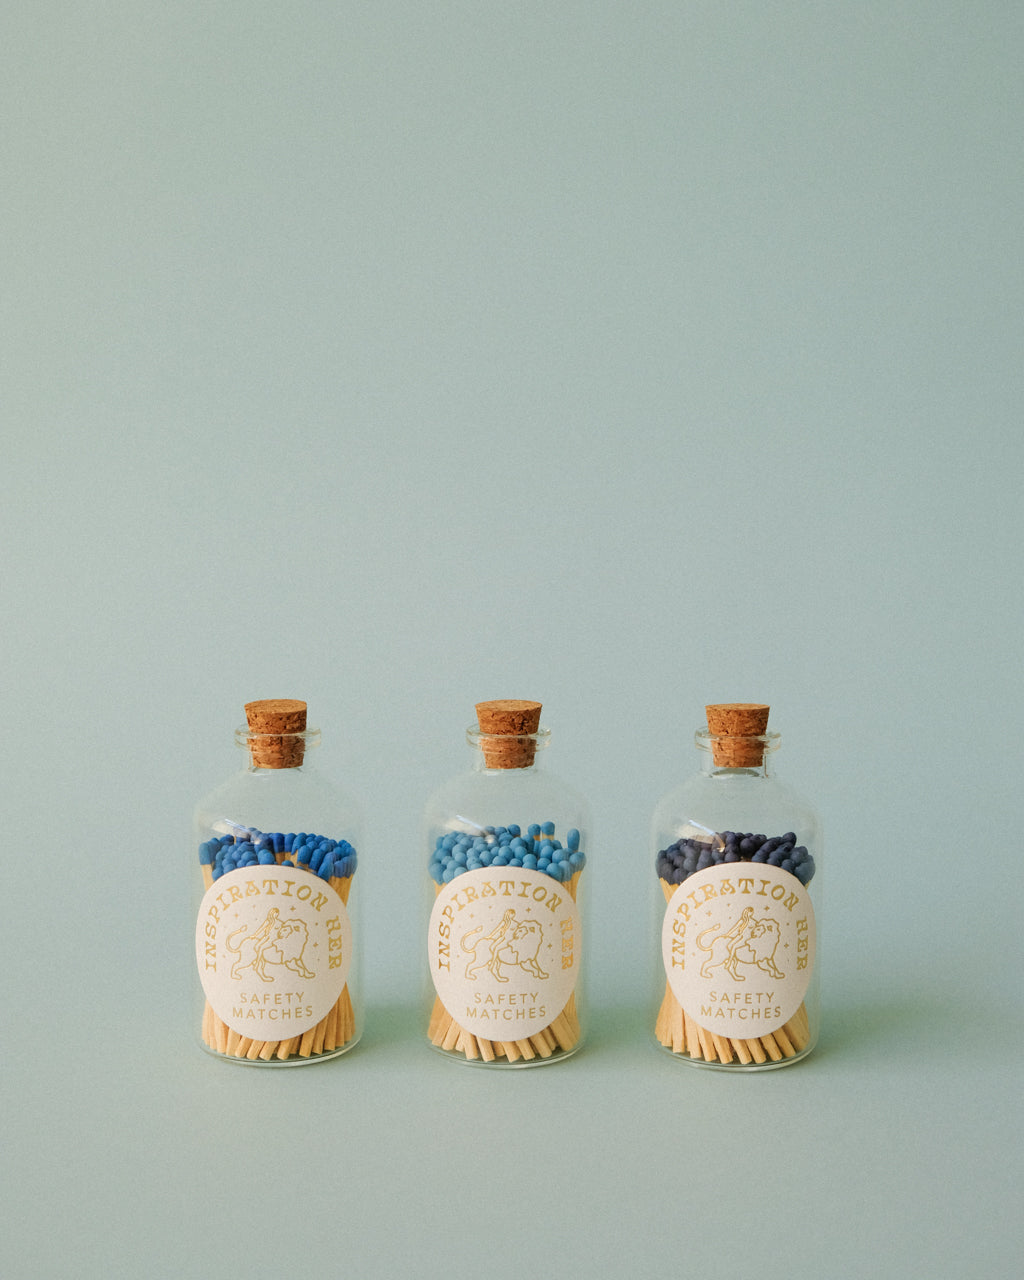 Decorative Safety Matches in a Glass Jar - Blue | Inspiration Her